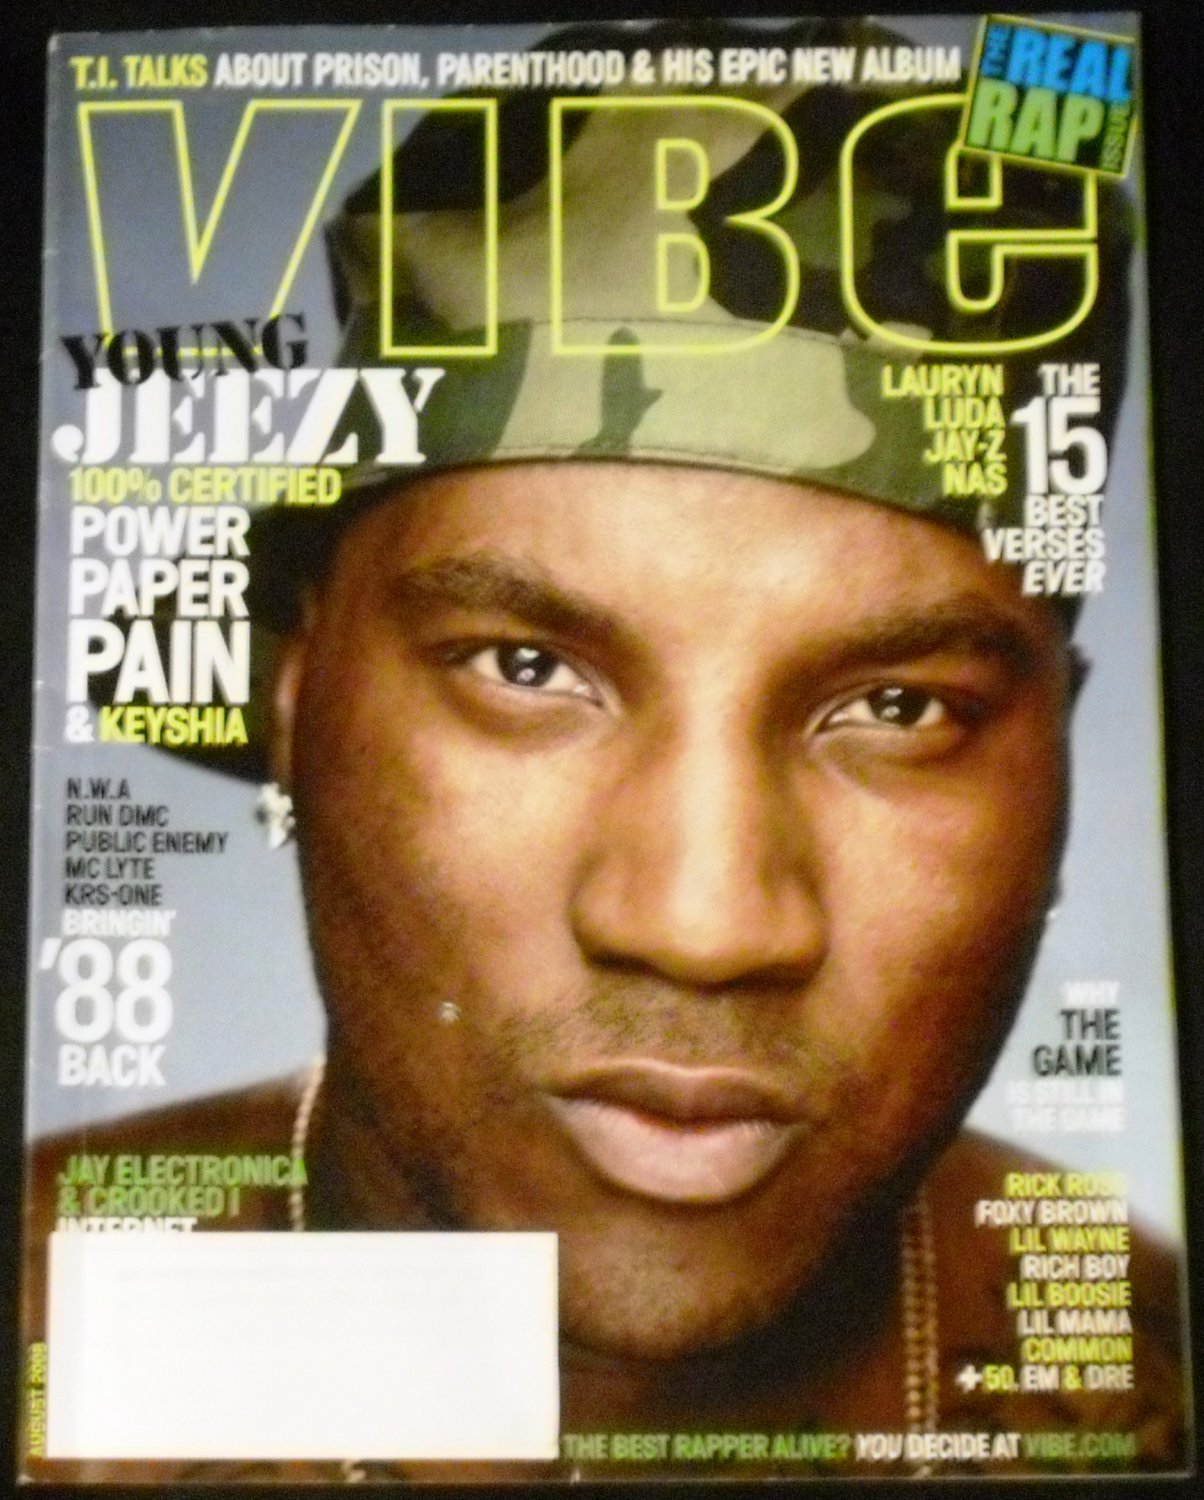 Vibe Magazine August 2008 Issue: Young Jeezy